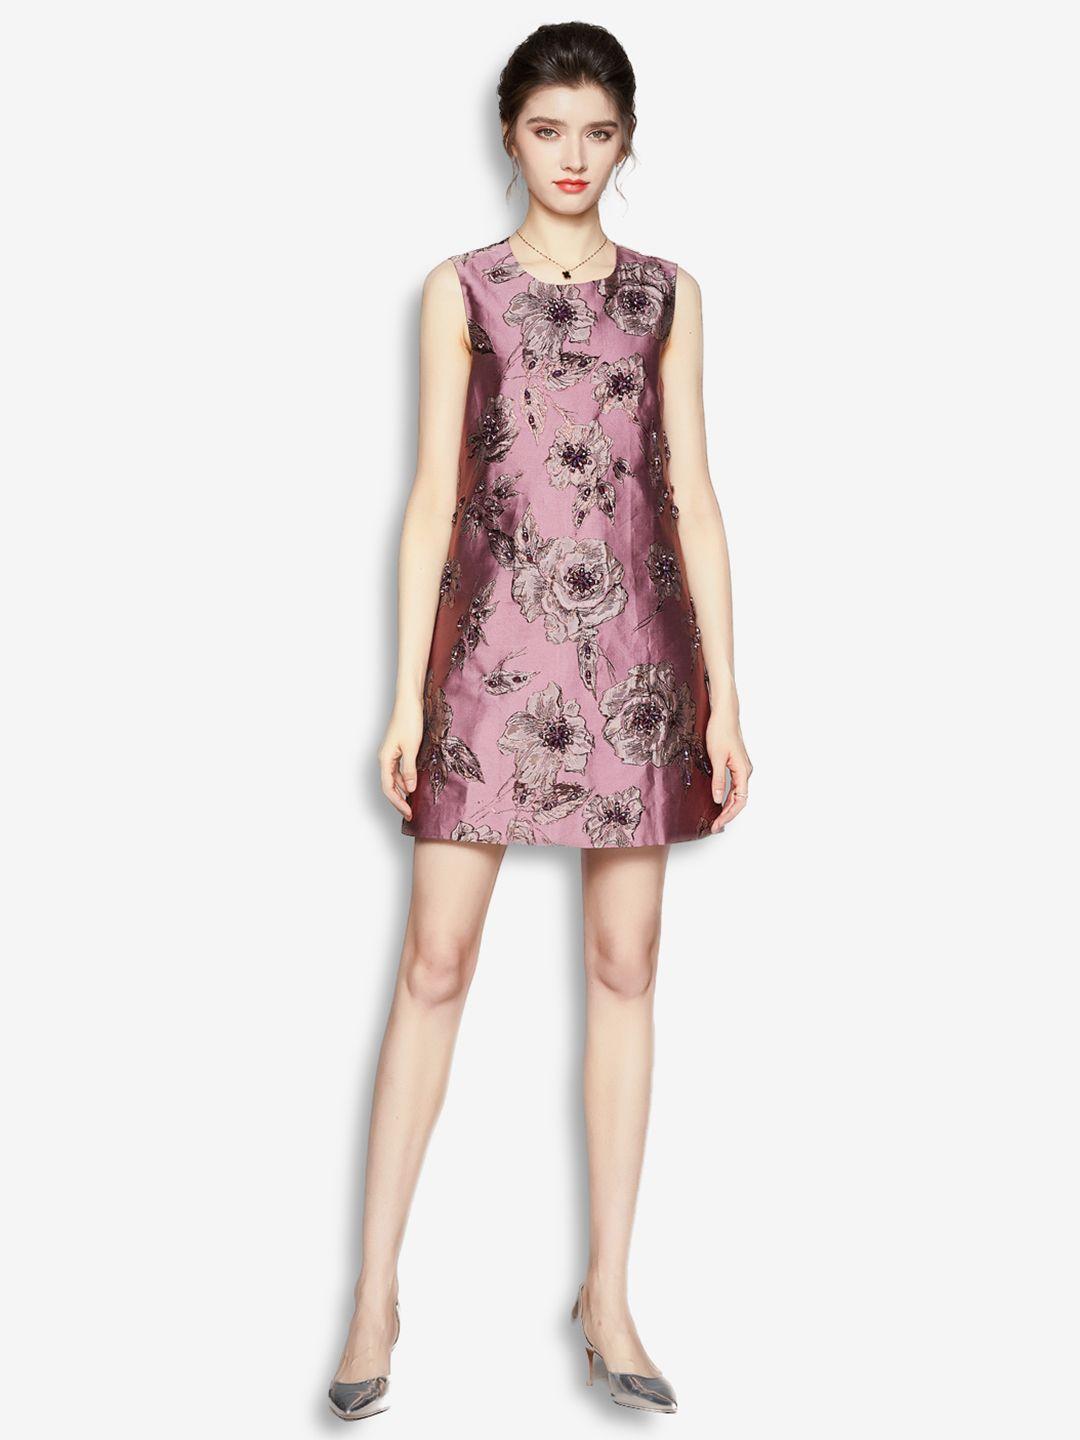 jc collection pink & black floral embroidered sheath dress